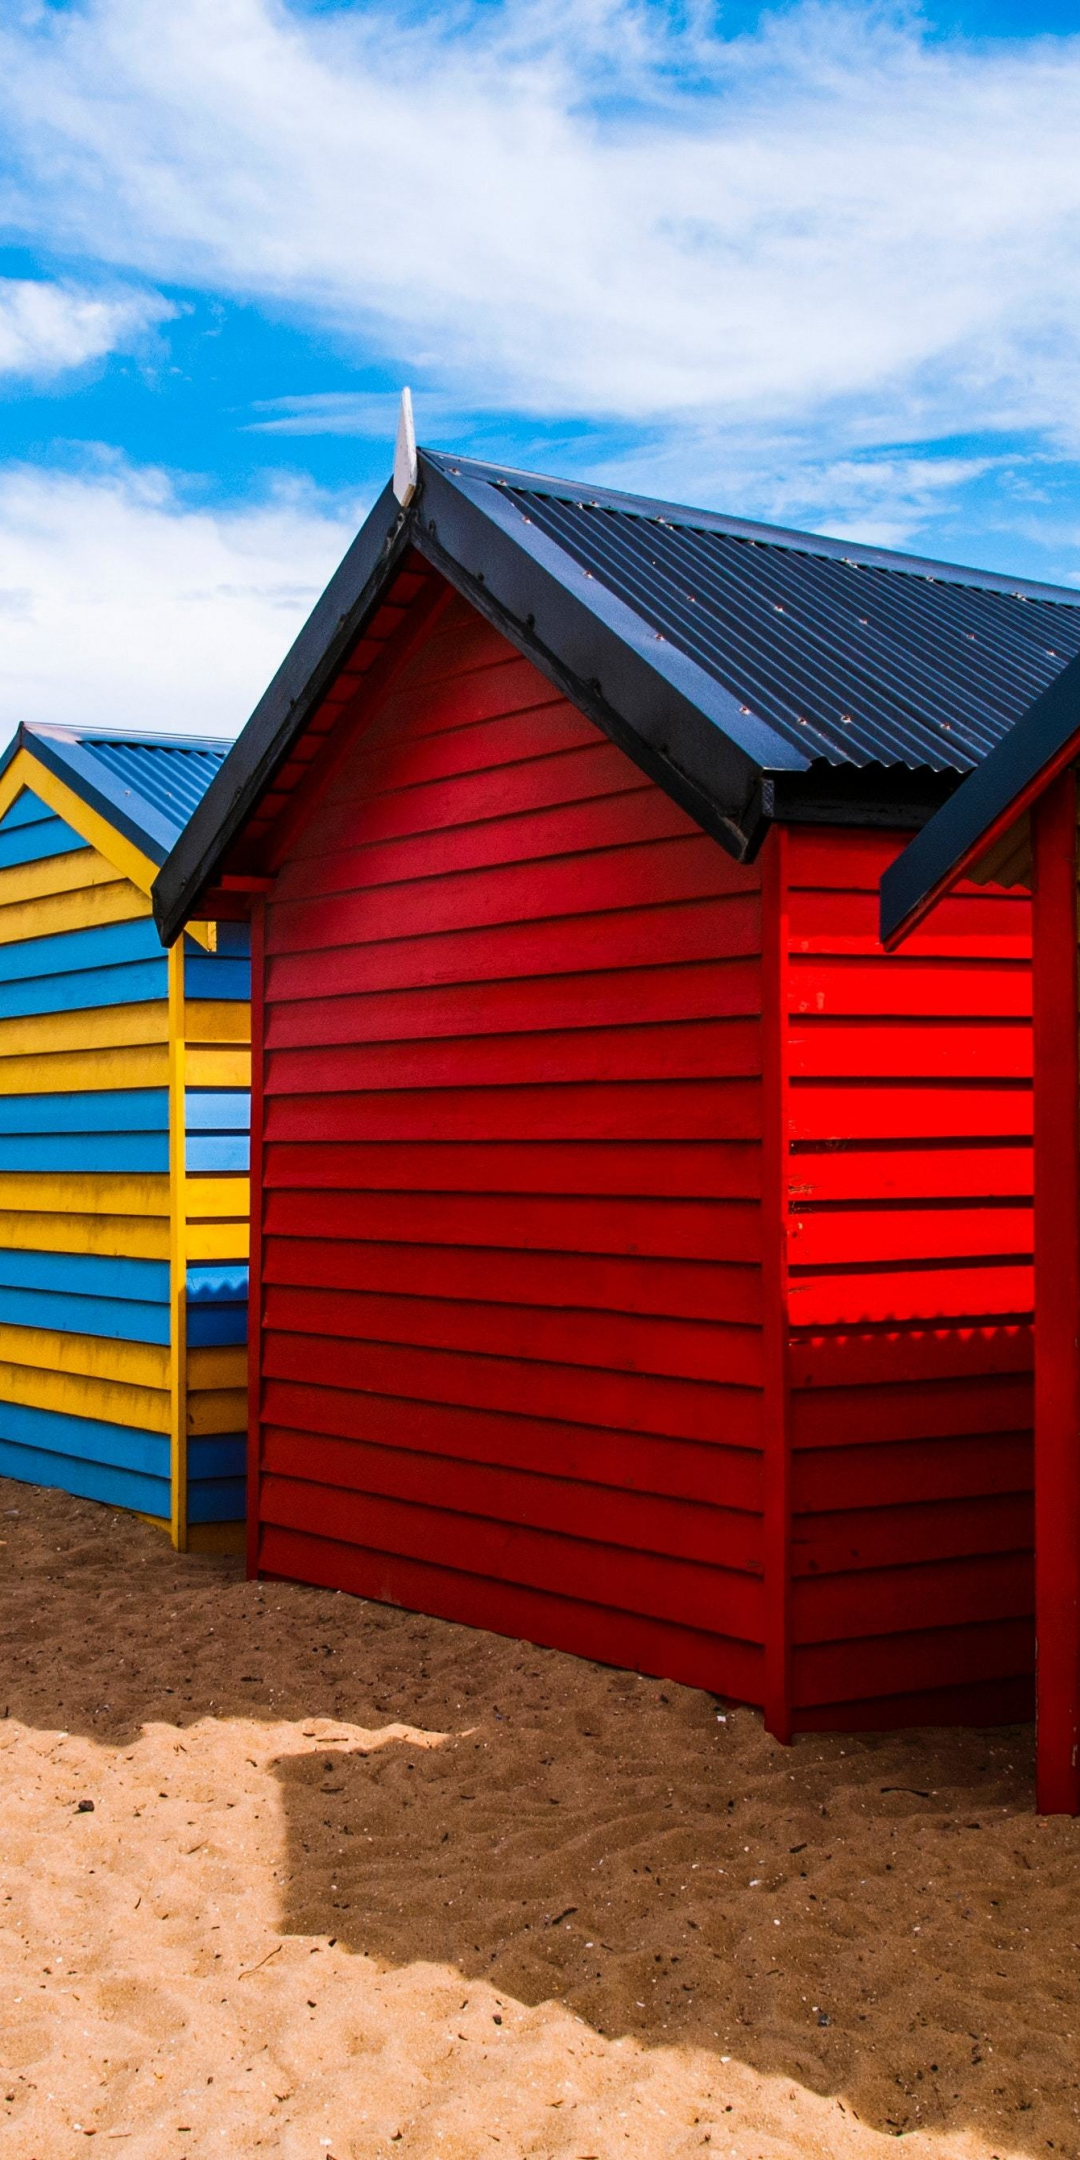 Colored houses, wooden cabins, 1080x2160 wallpaper